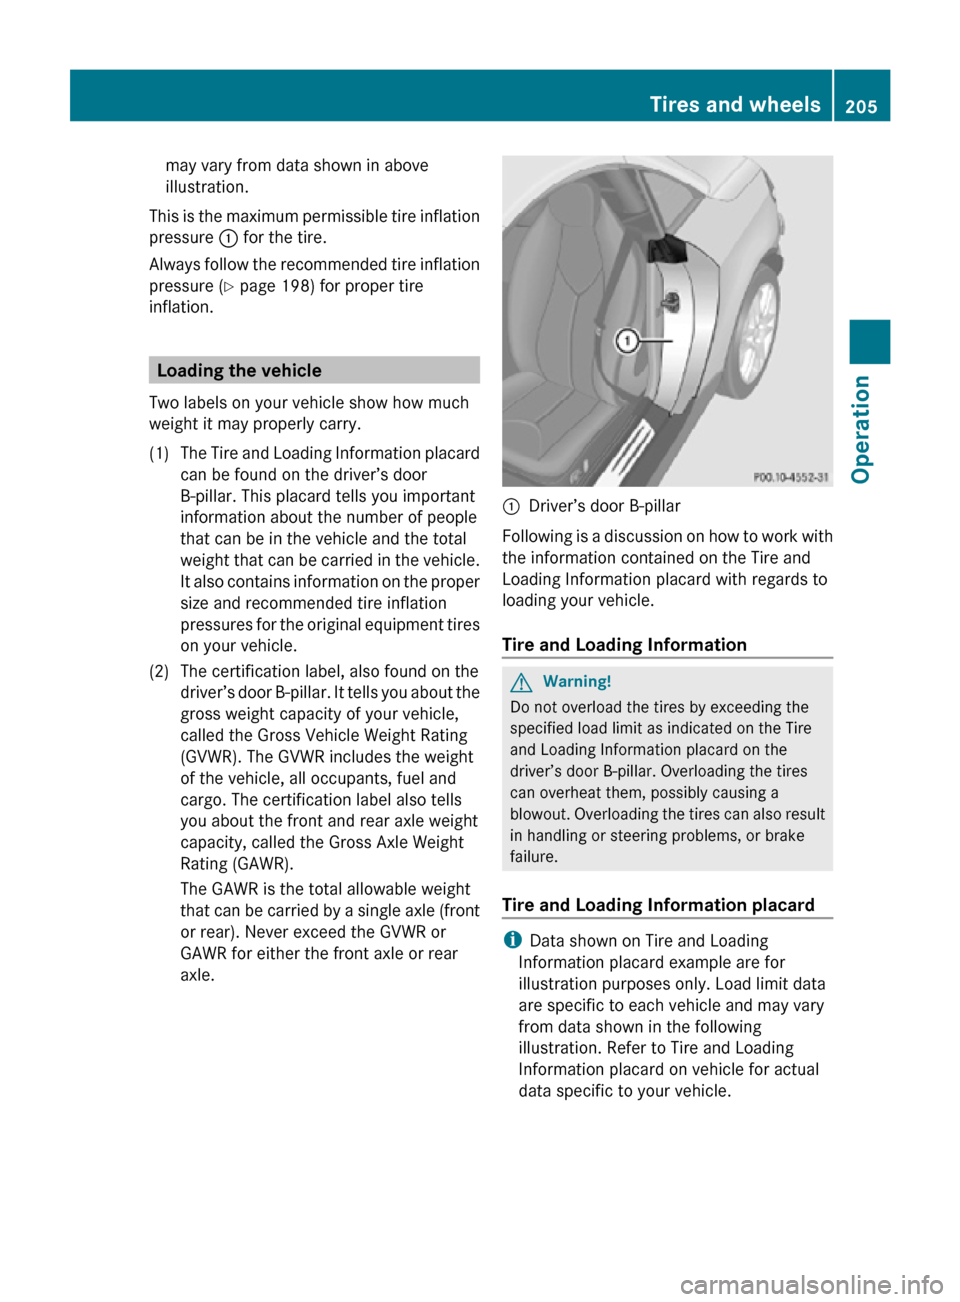 MERCEDES-BENZ SLK300 2010 R171 Owners Manual may vary from data shown in above
illustration.
This is the maximum permissible tire inflation
pressure  : for the tire.
Always follow the recommended tire inflation
pressure ( Y page 198) for proper 